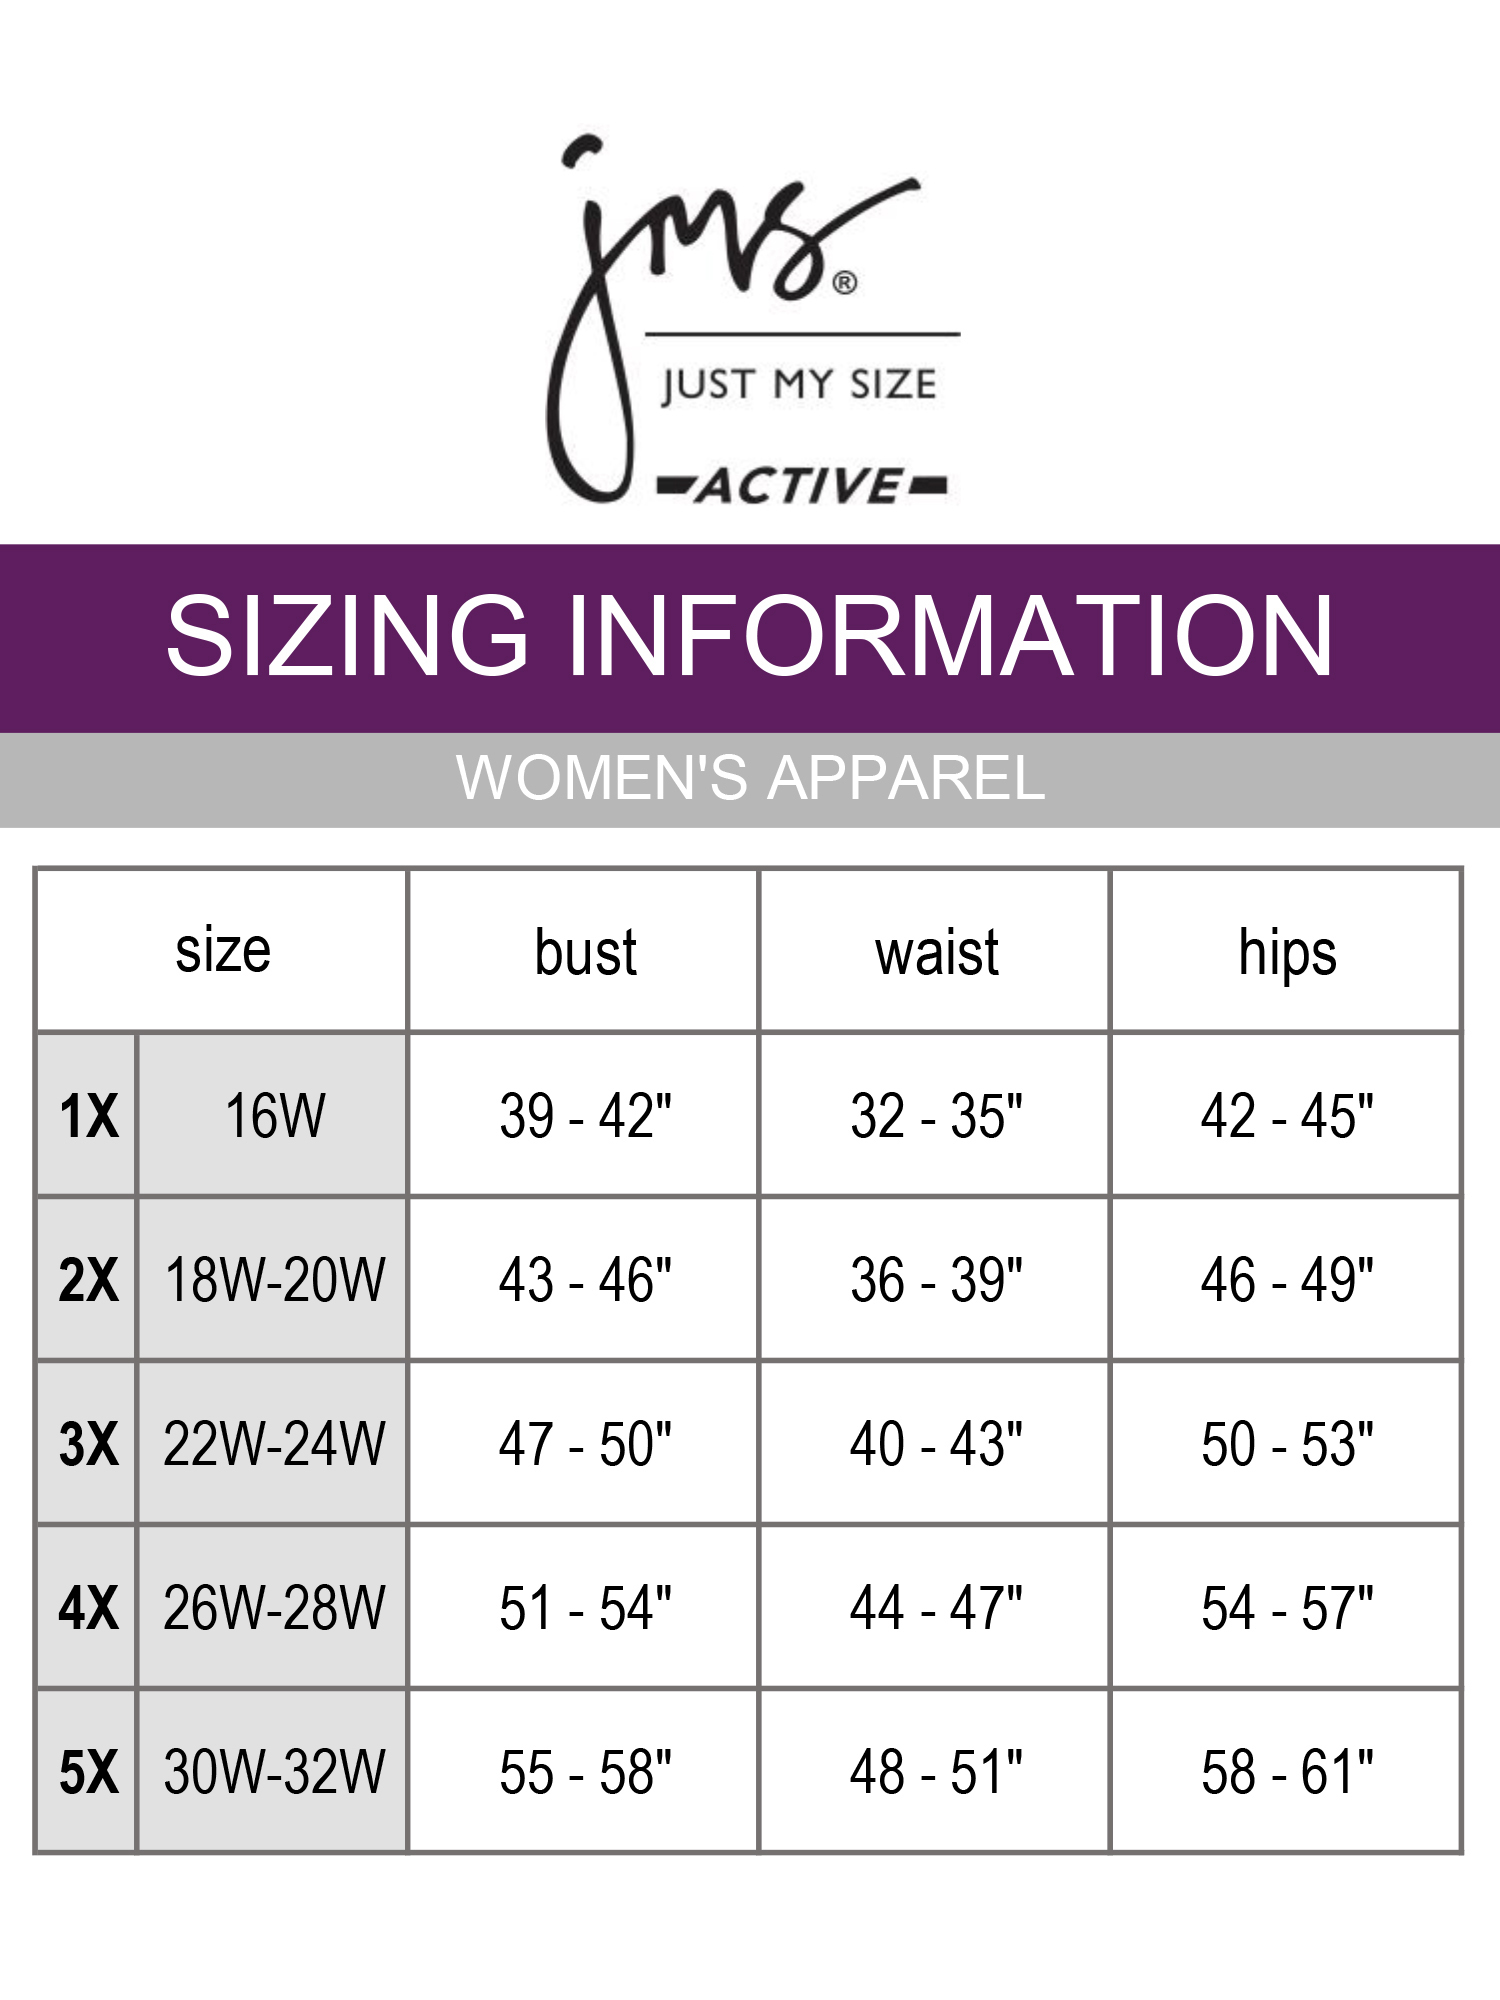 JMS by Hanes Women's Plus Size Stretch Jersey Legging - image 5 of 6